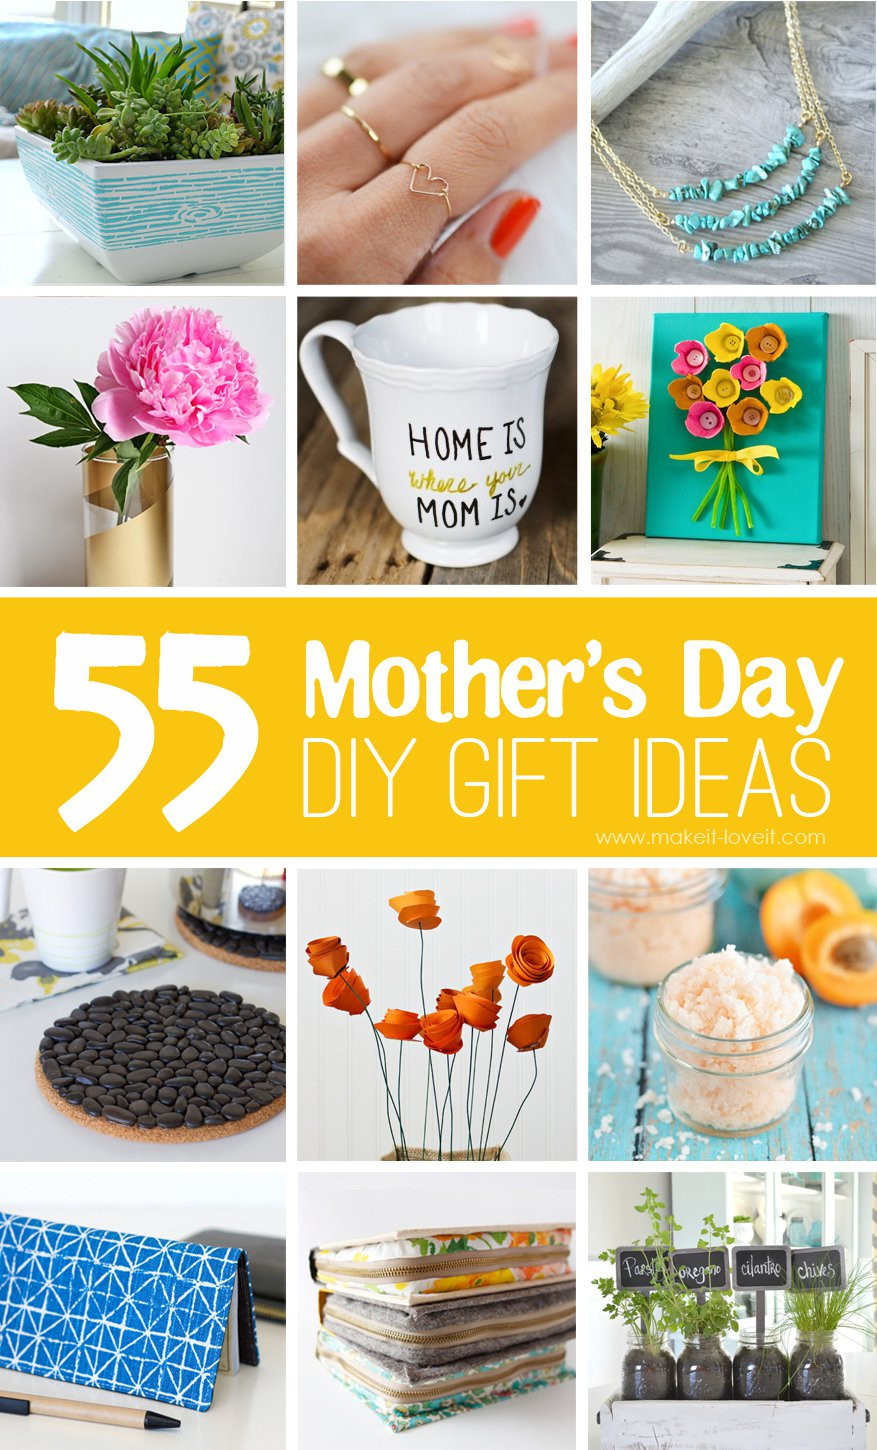 Mothers Day Gift Ideads
 40 Homemade Mother s Day Gift Ideas